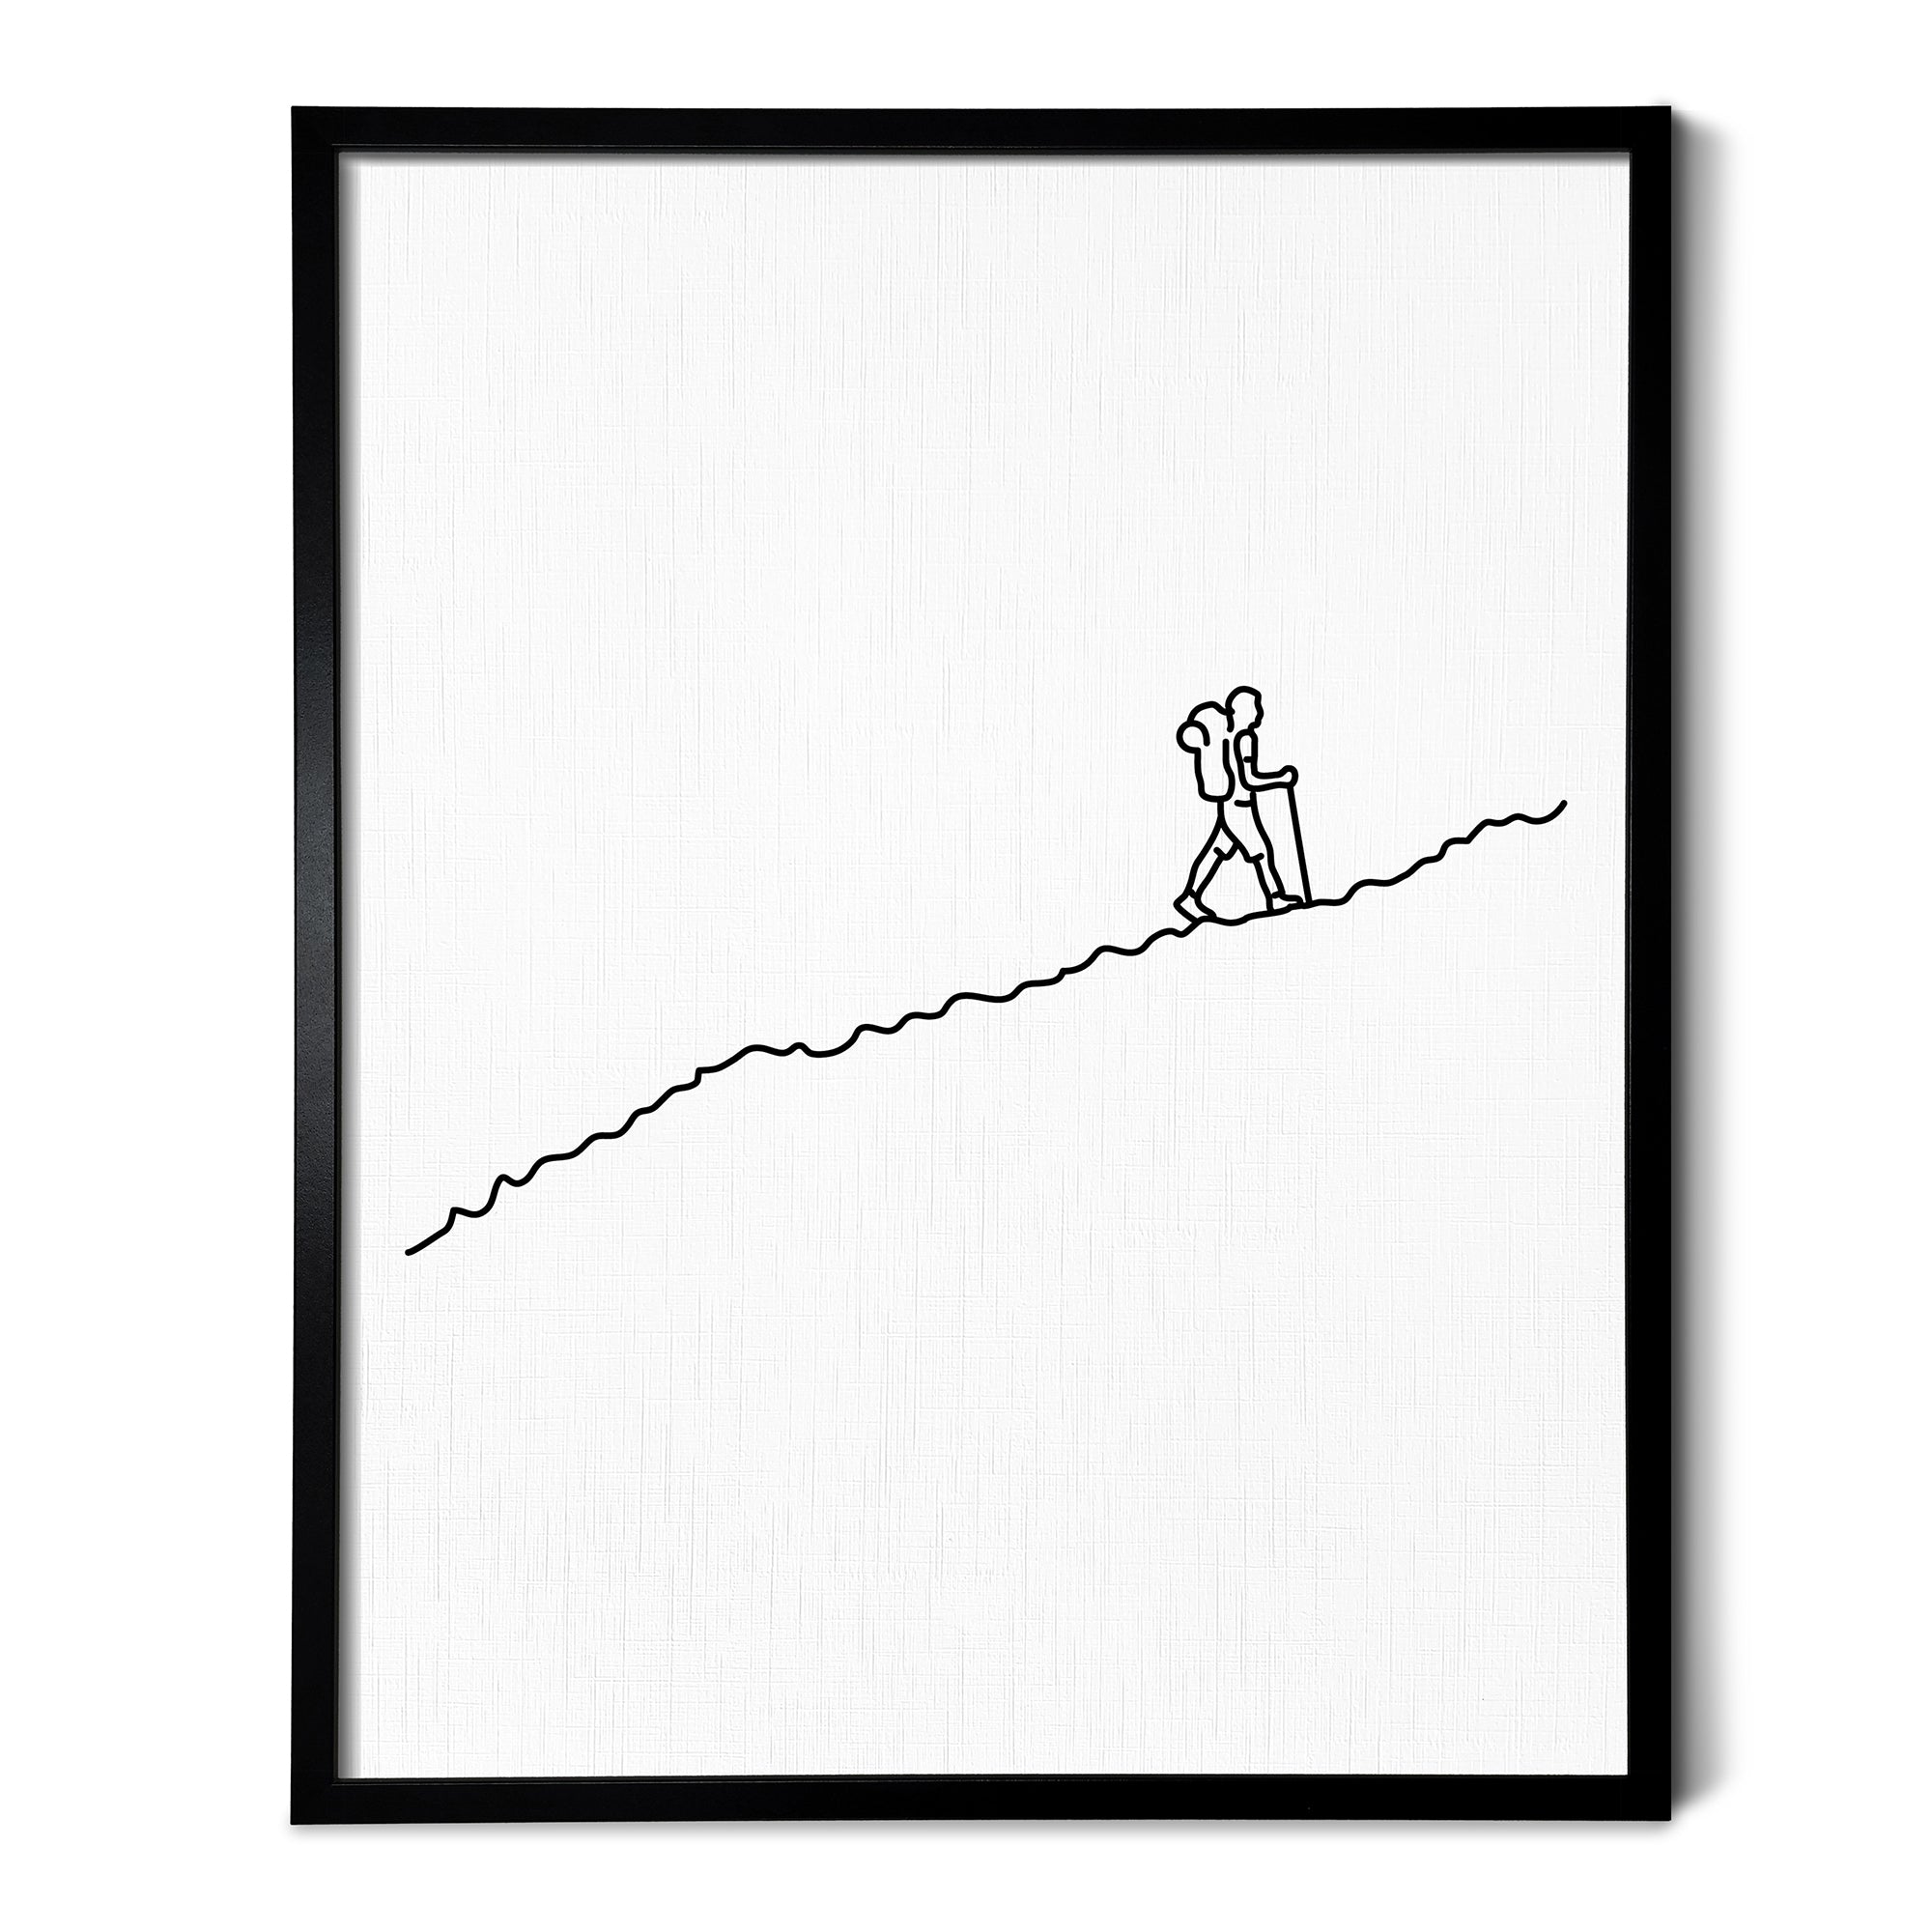 A line art drawing of Hiking on white linen paper in a thin black picture frame